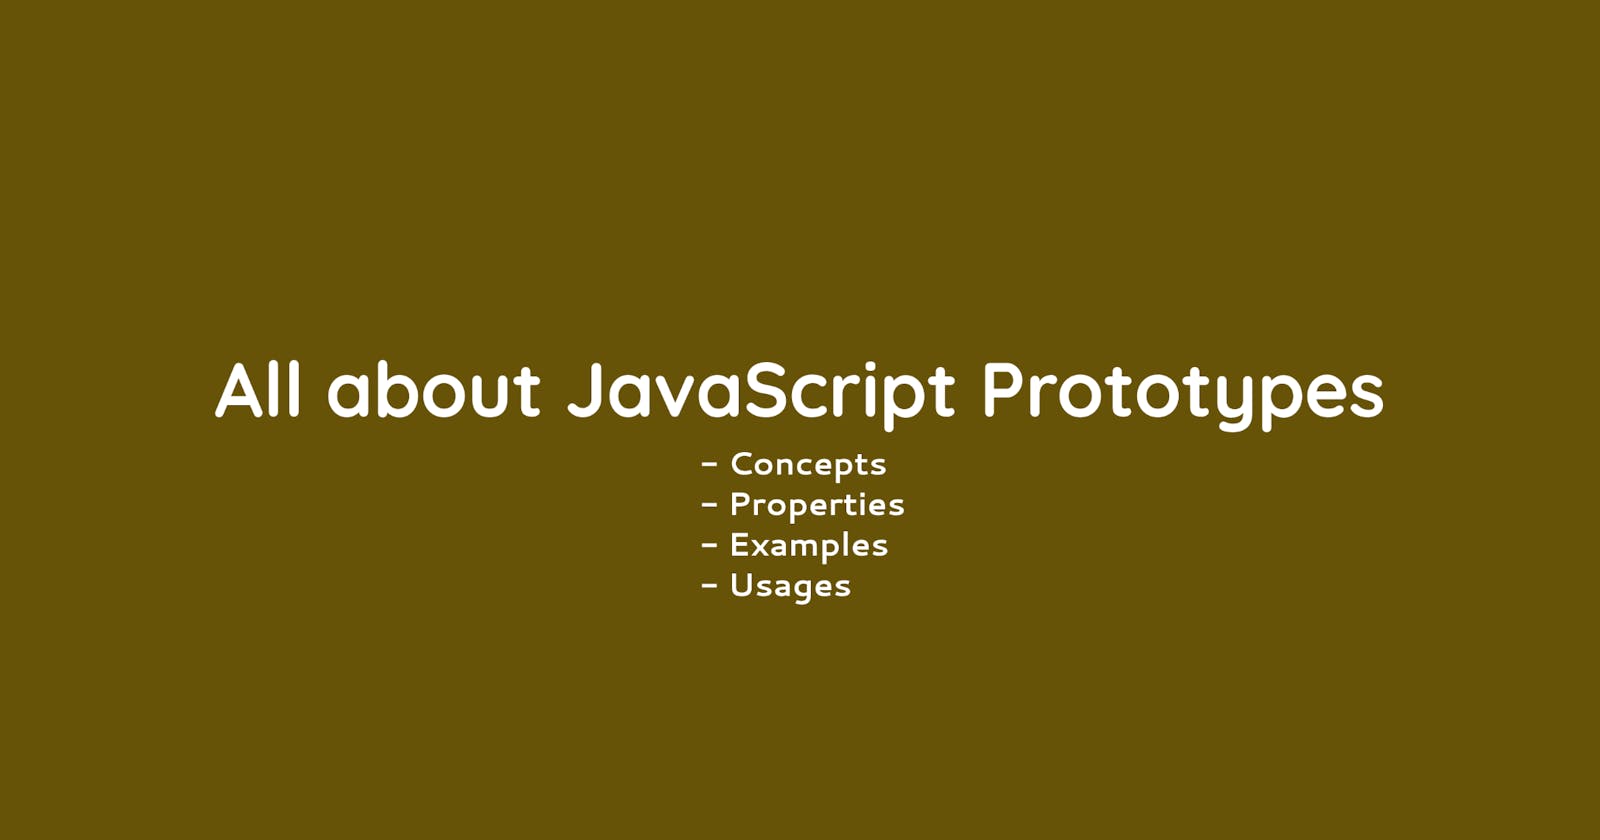 All about JavaScript Prototypes